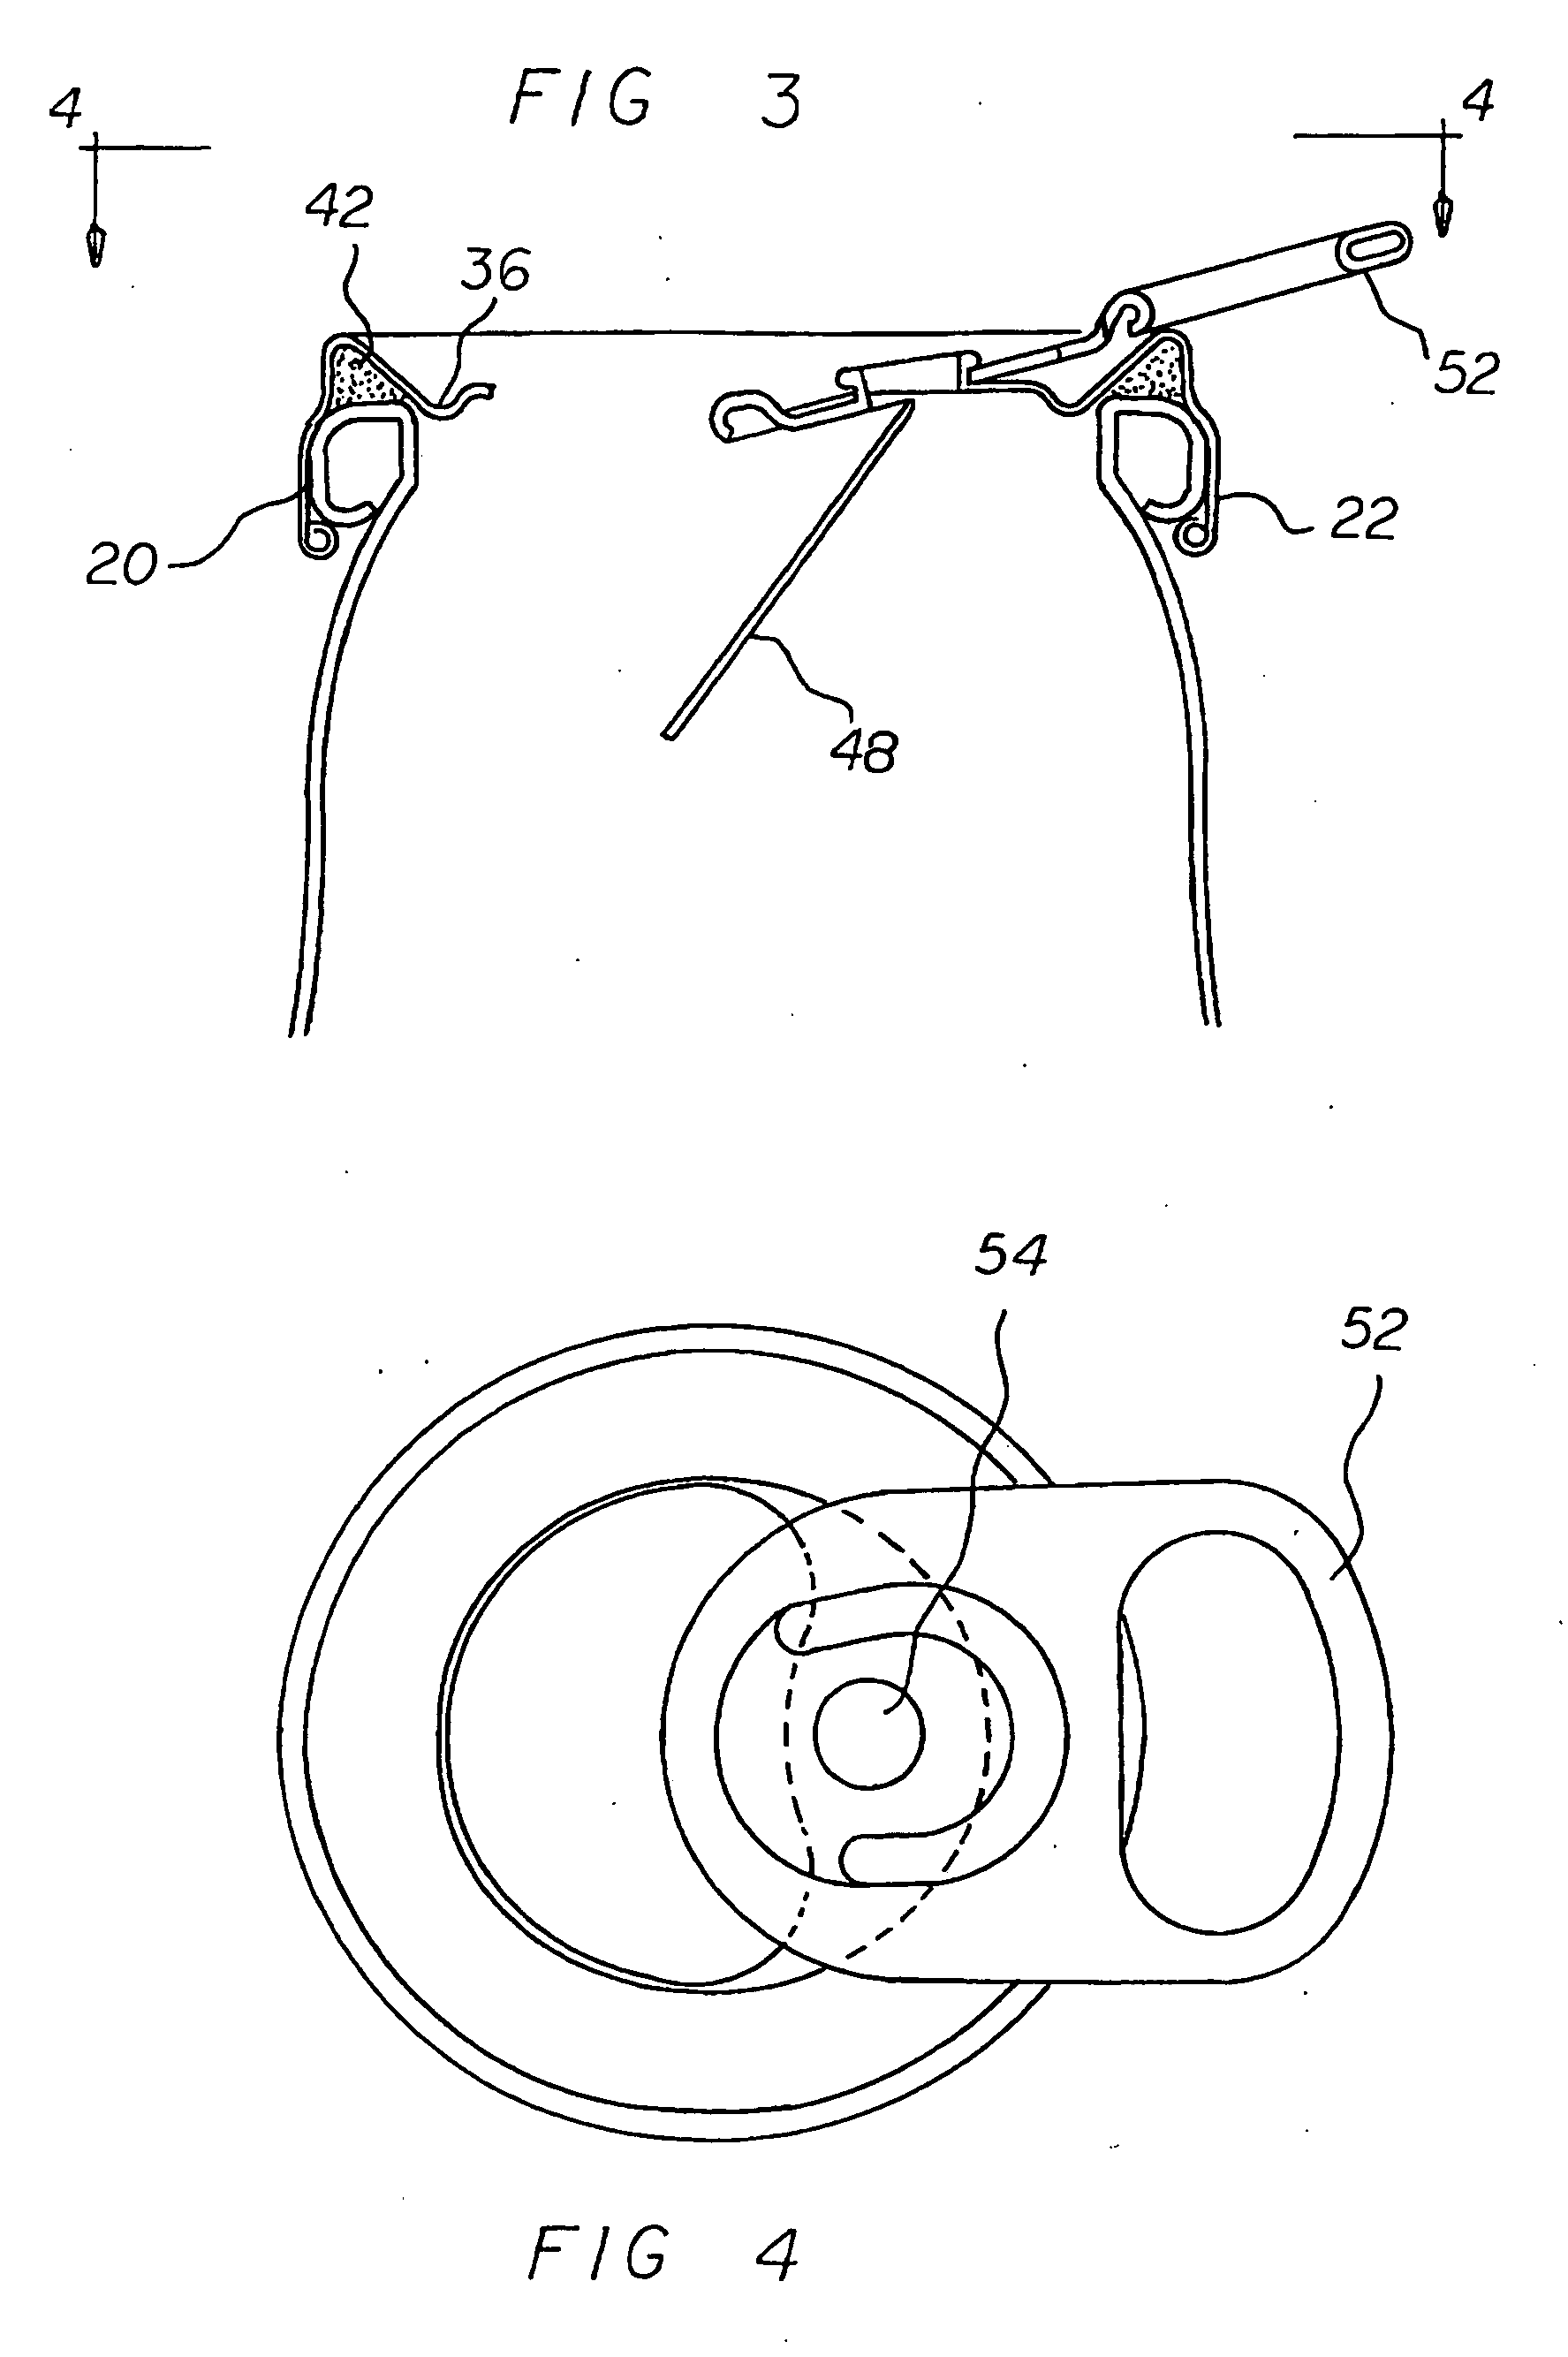 Lift lever crown cap system and method